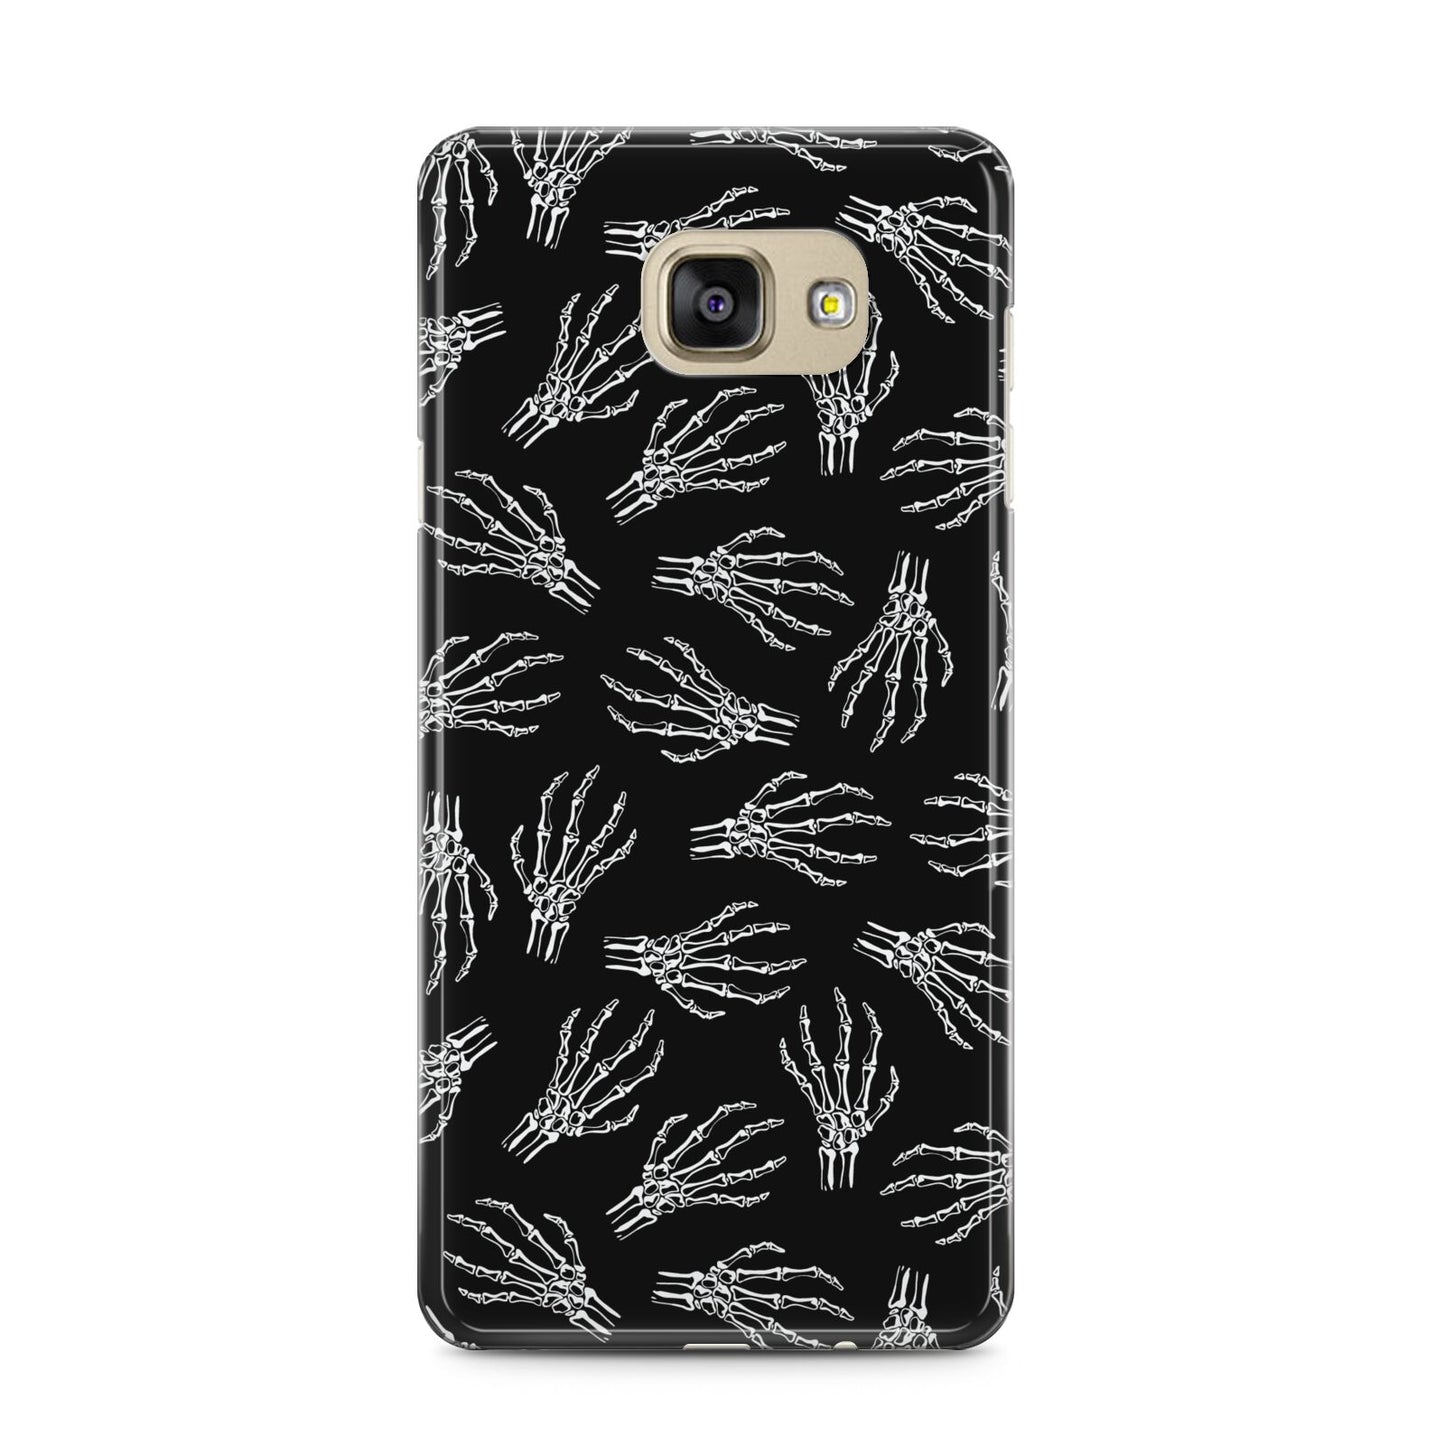 Skeleton Hands Samsung Galaxy A5 2016 Case on gold phone